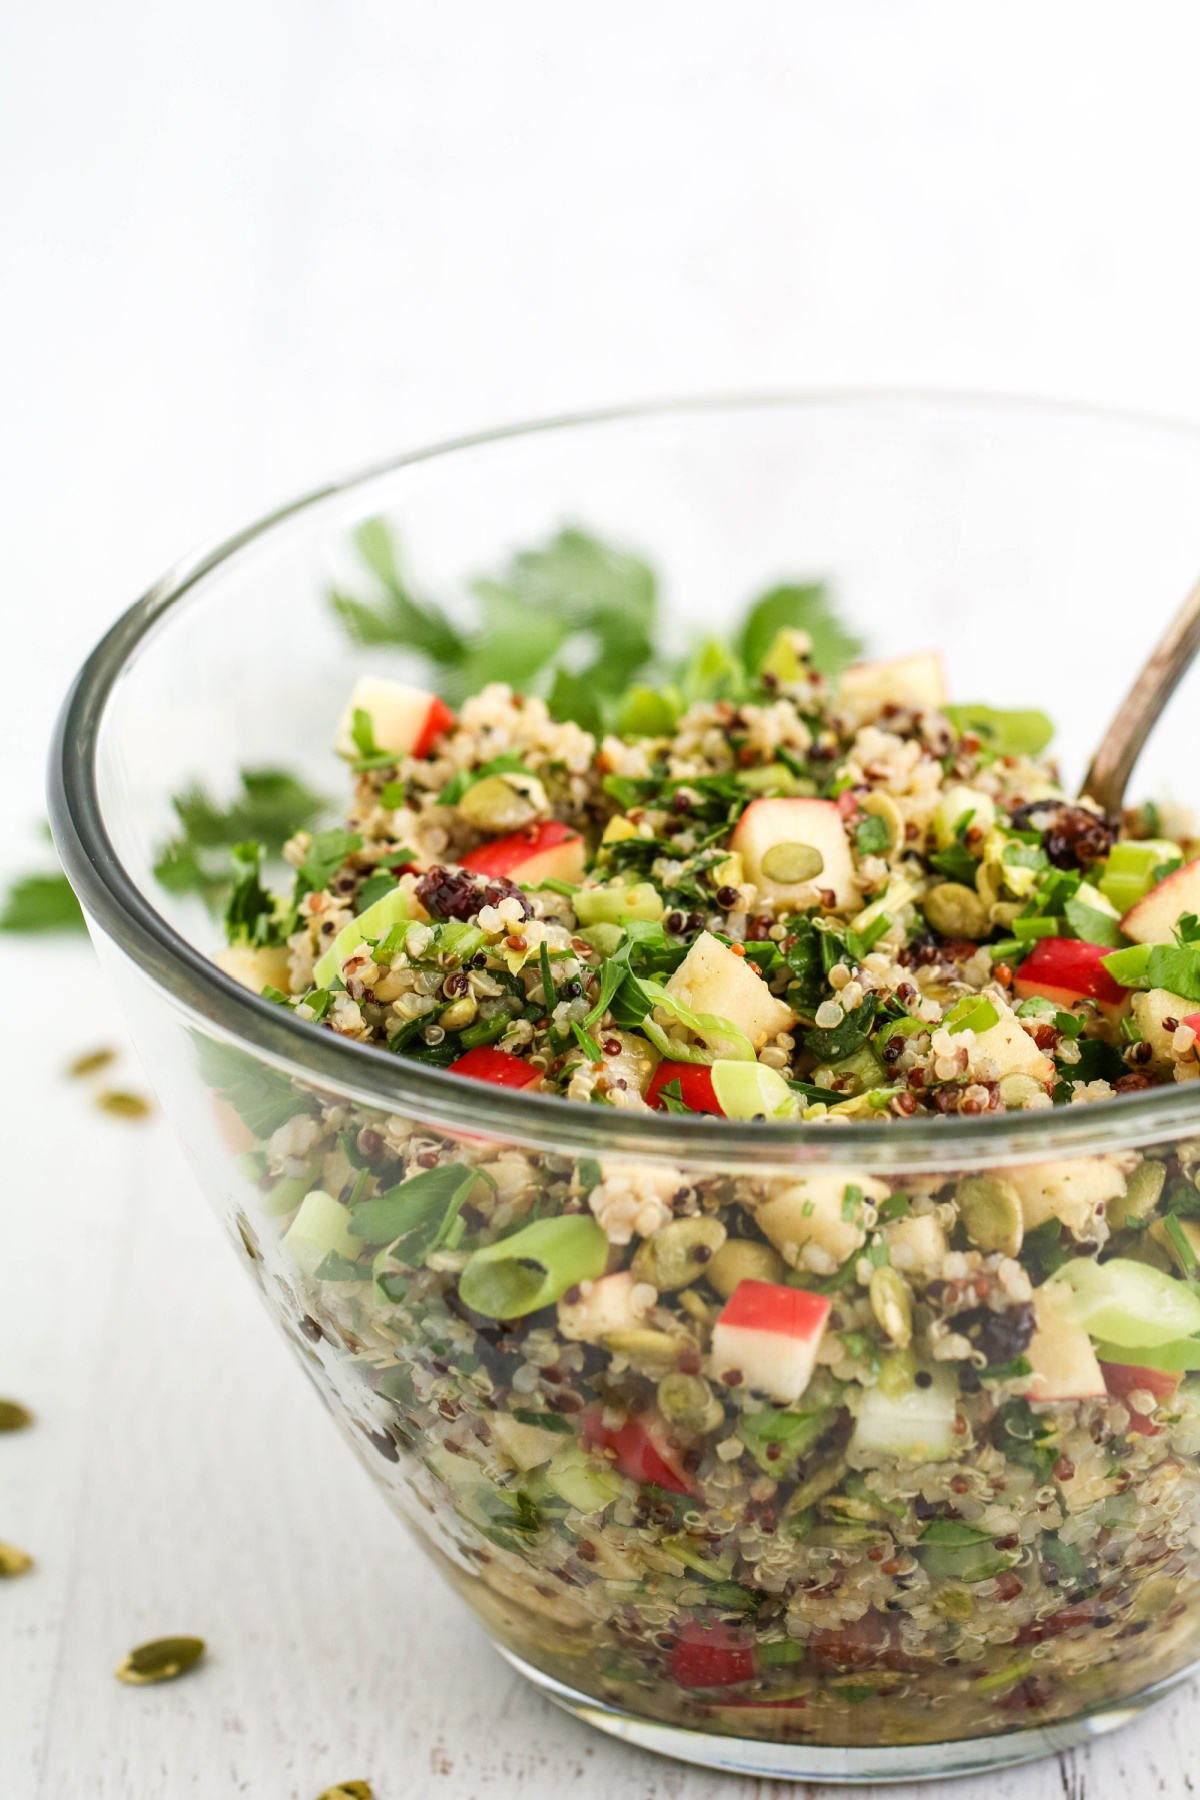 Apple quinoa salad with cranberries and pepitas in glass bowl.